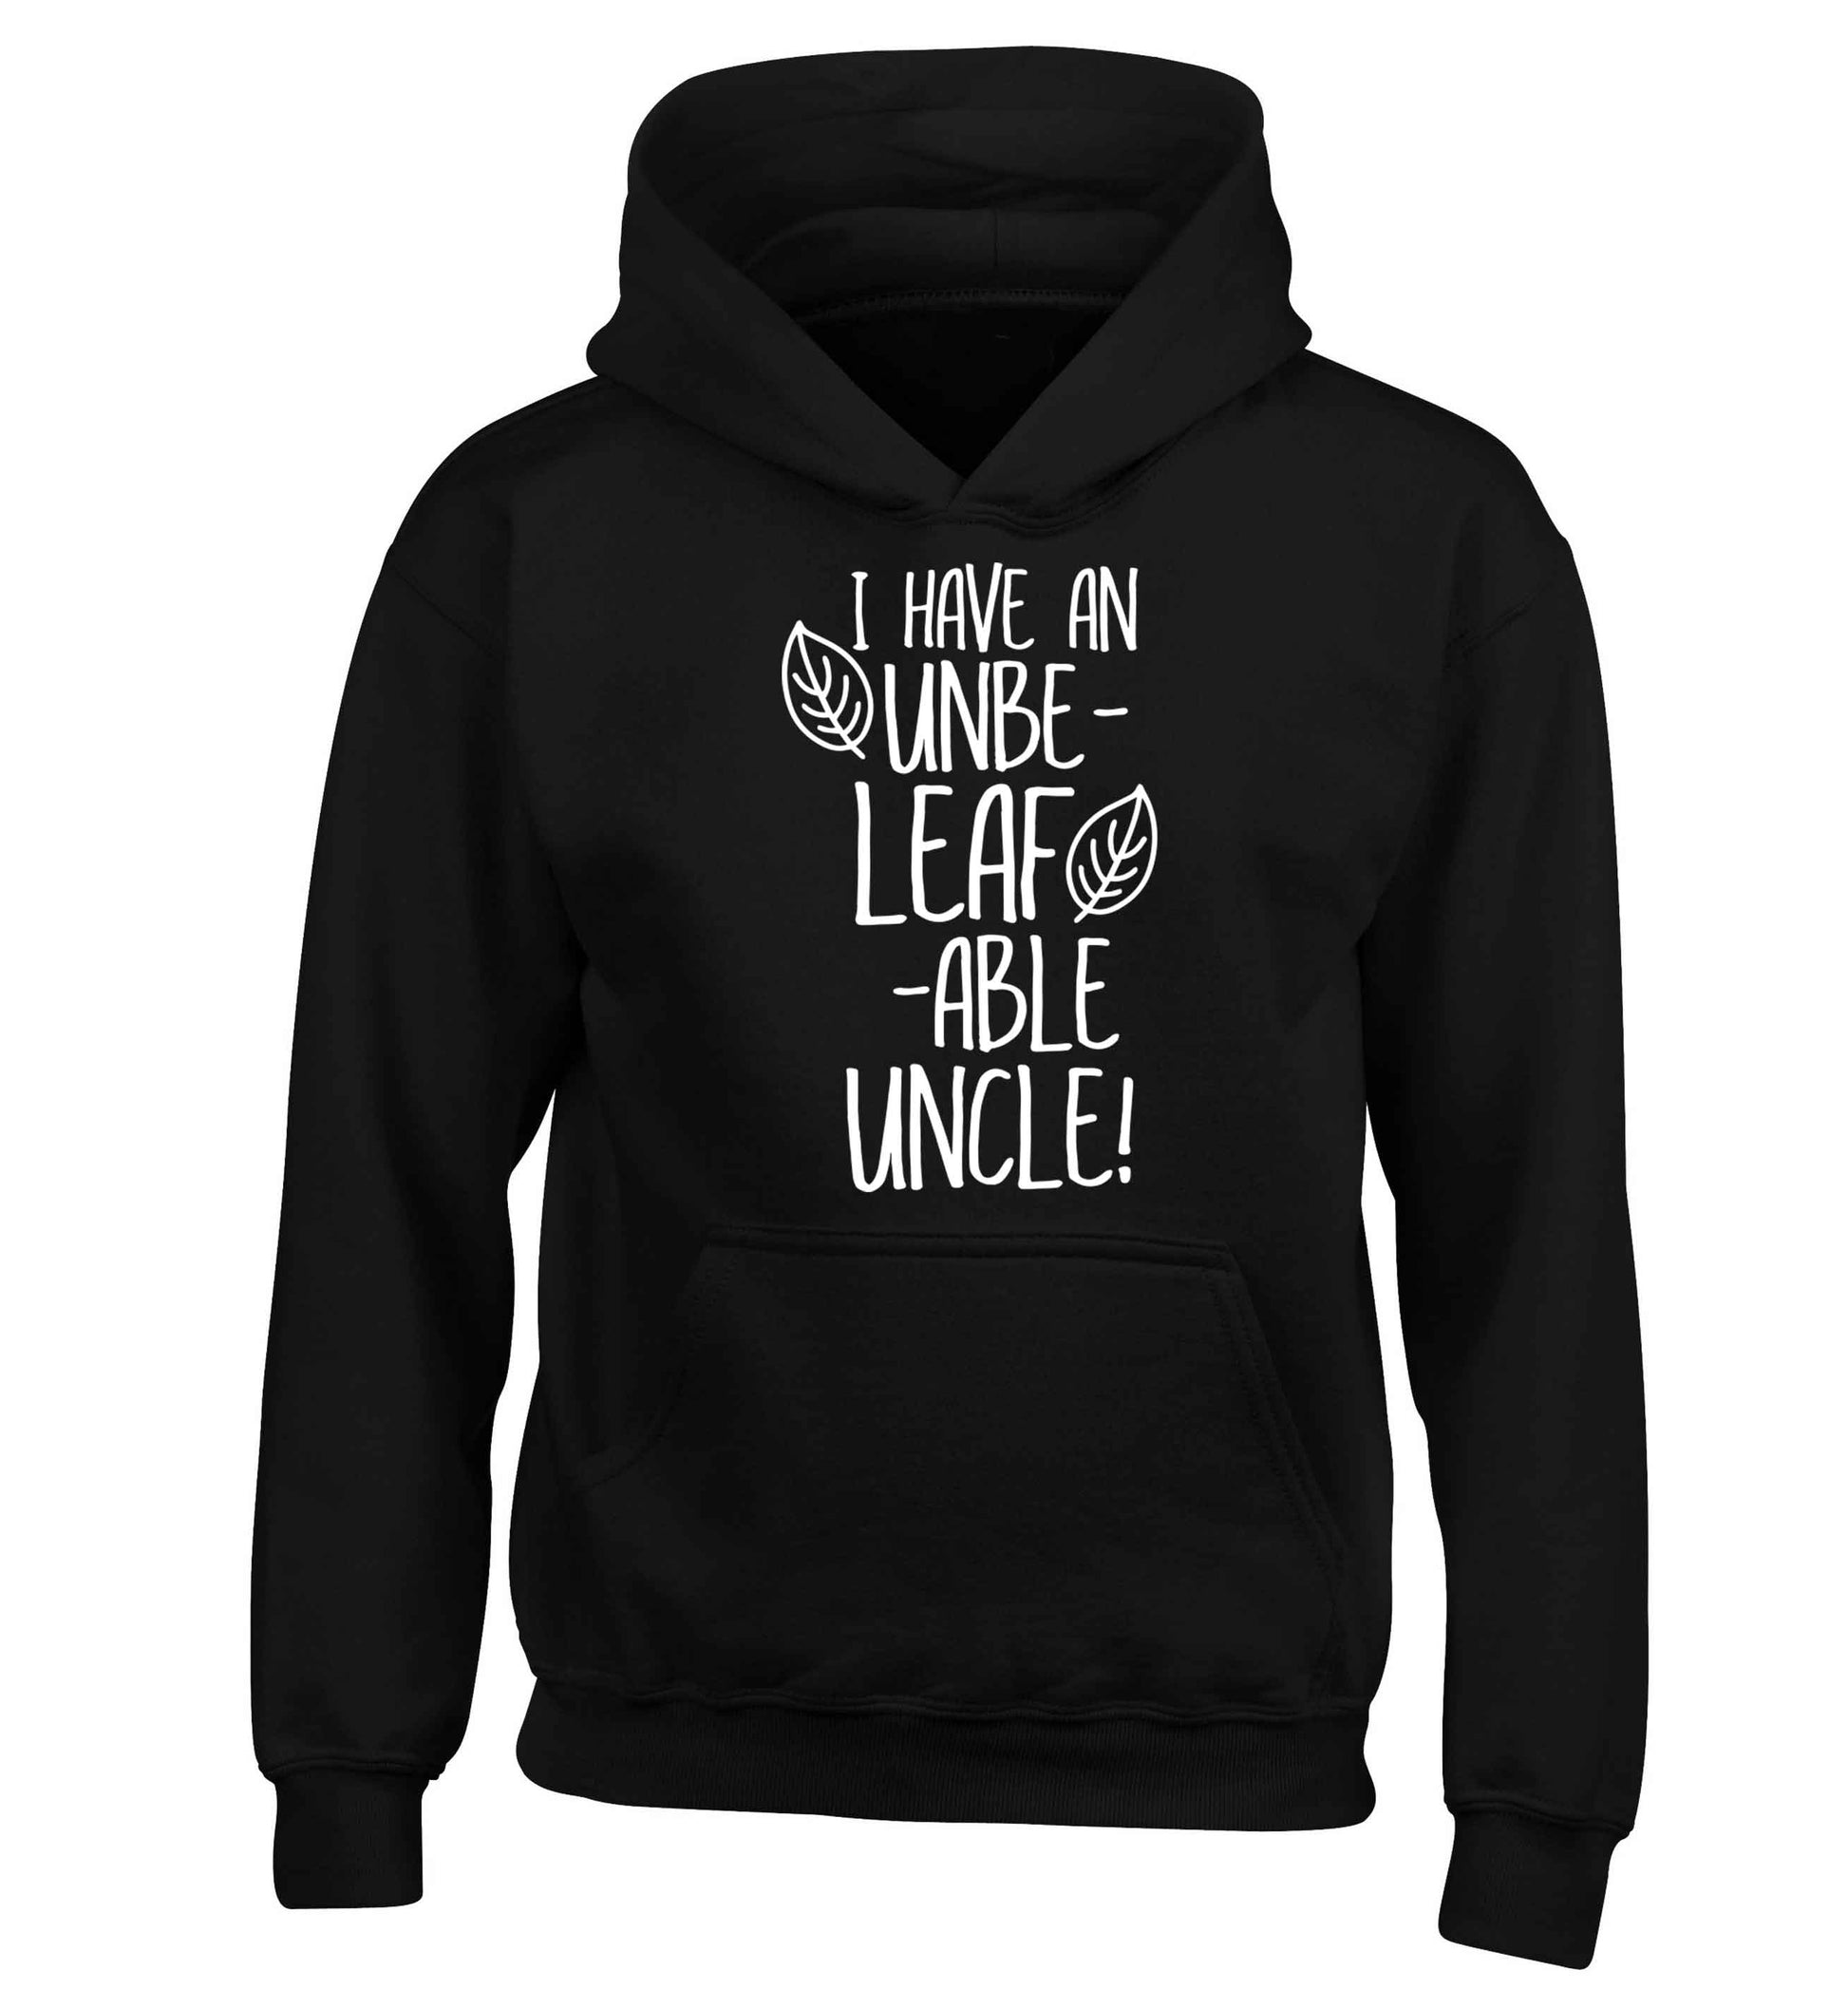 I have an unbe-leaf-able uncle children's black hoodie 12-13 Years